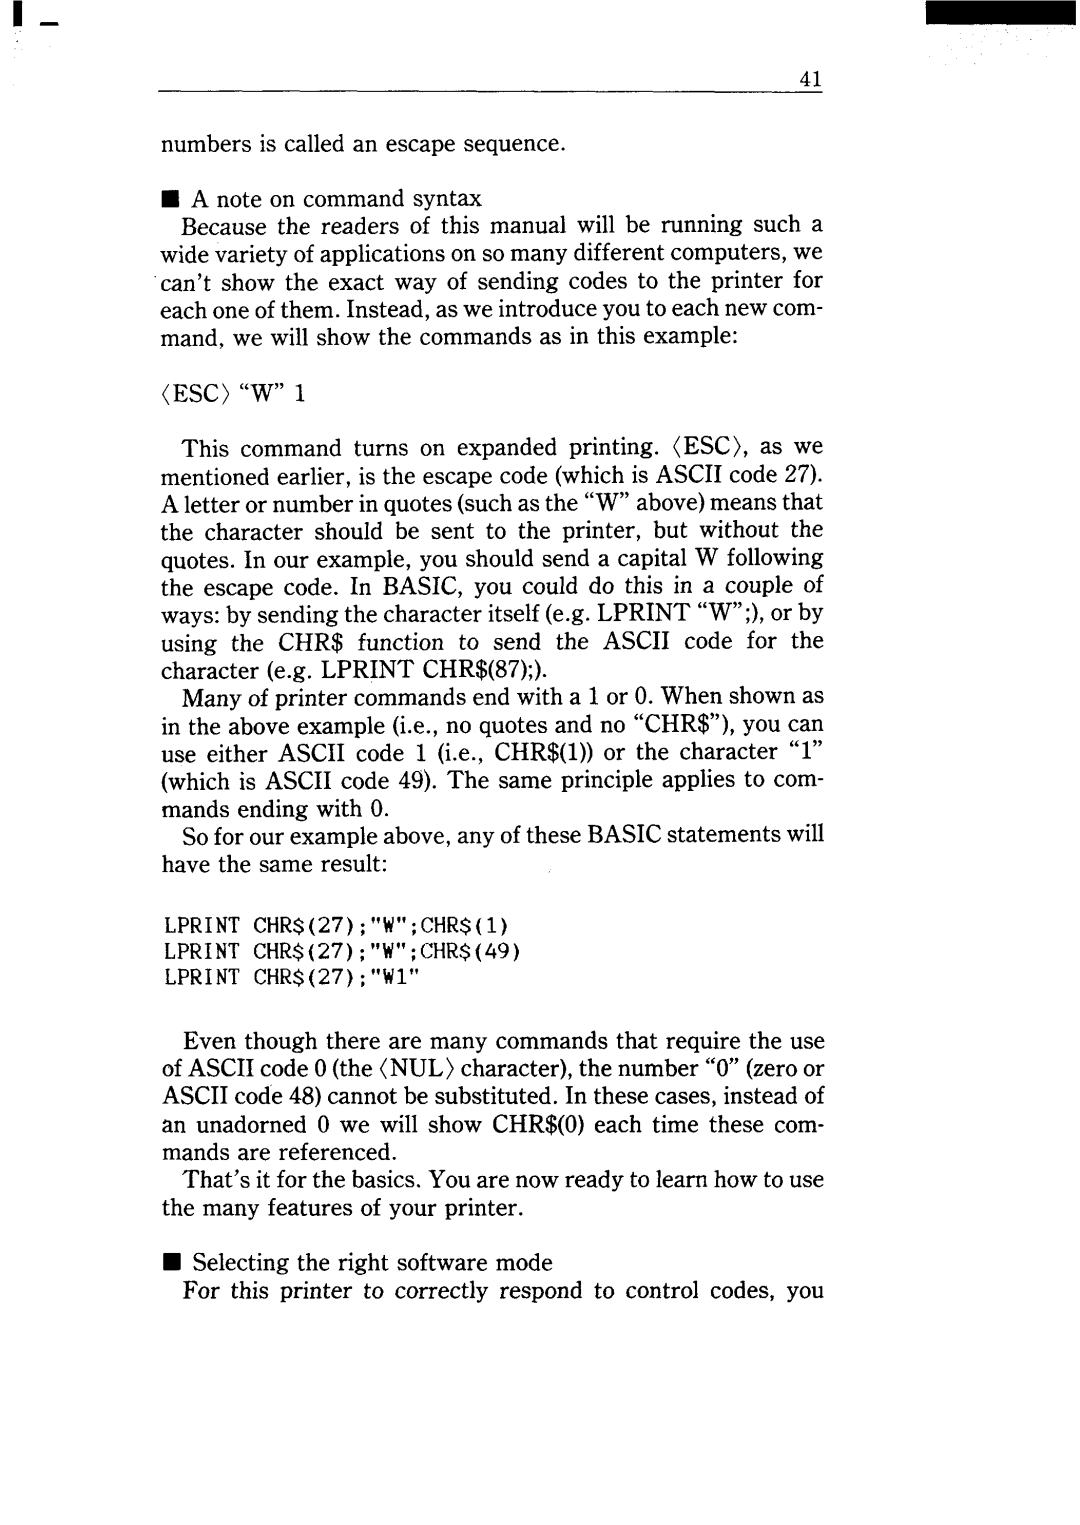 Star Micronics NX-15 user manual numbers is called an escape sequence A note on command syntax, Esc “W” 